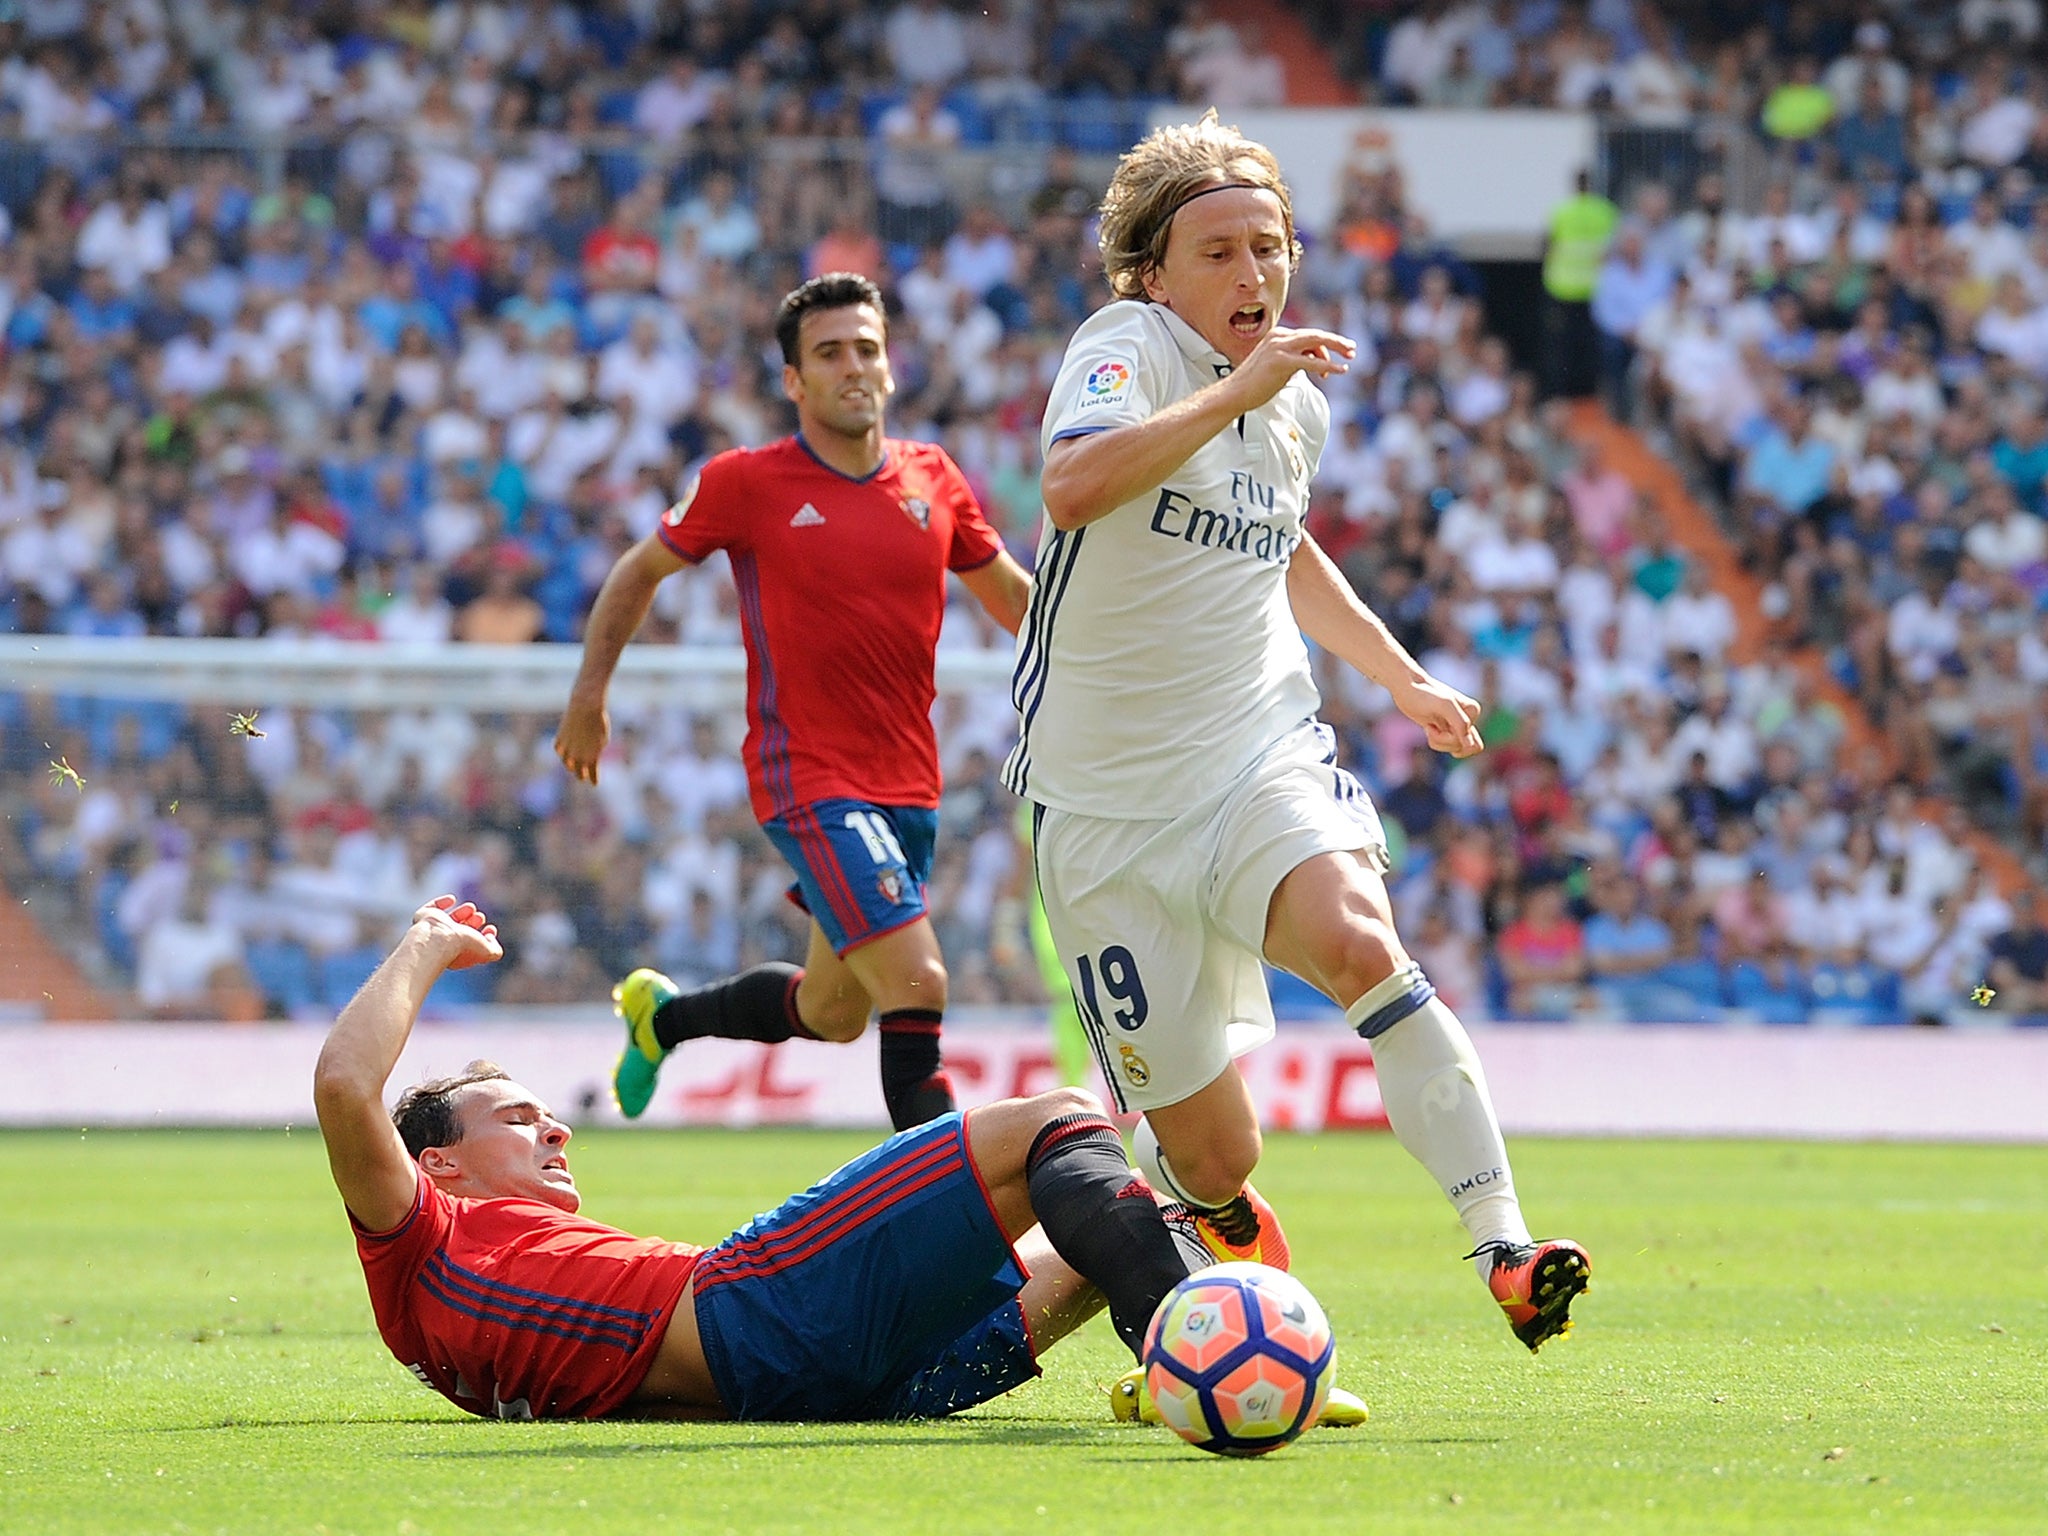 Osasuna were beaten 5-2 by Real Madrid in the last encounter between the two sides